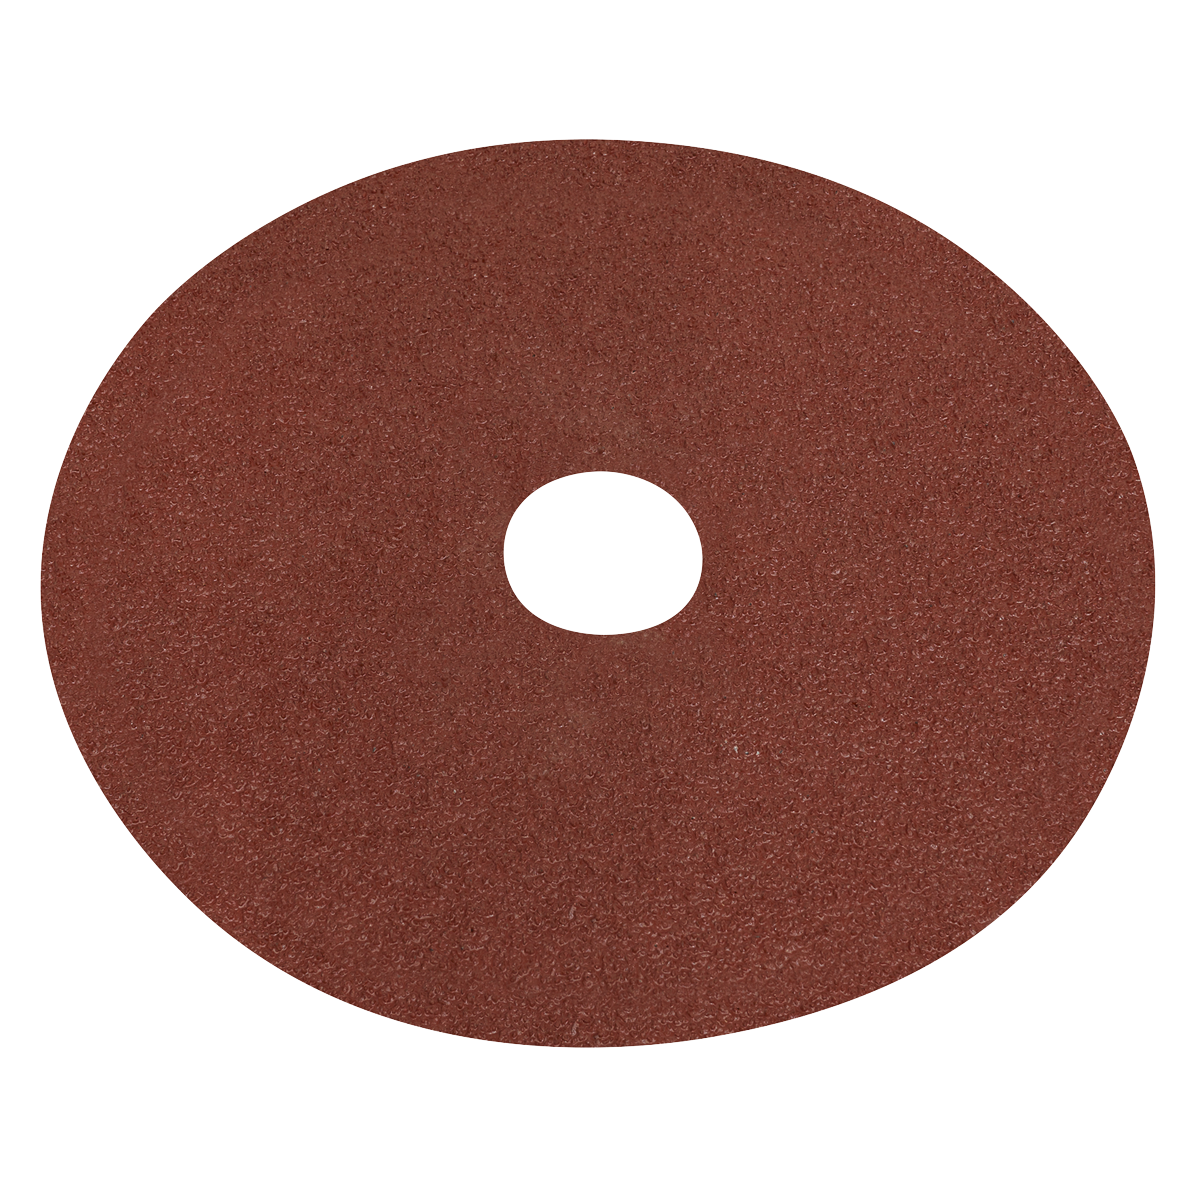 Fibre Backed Disc Ø125mm - 40Grit Pack of 25 - WSD540 - Farming Parts